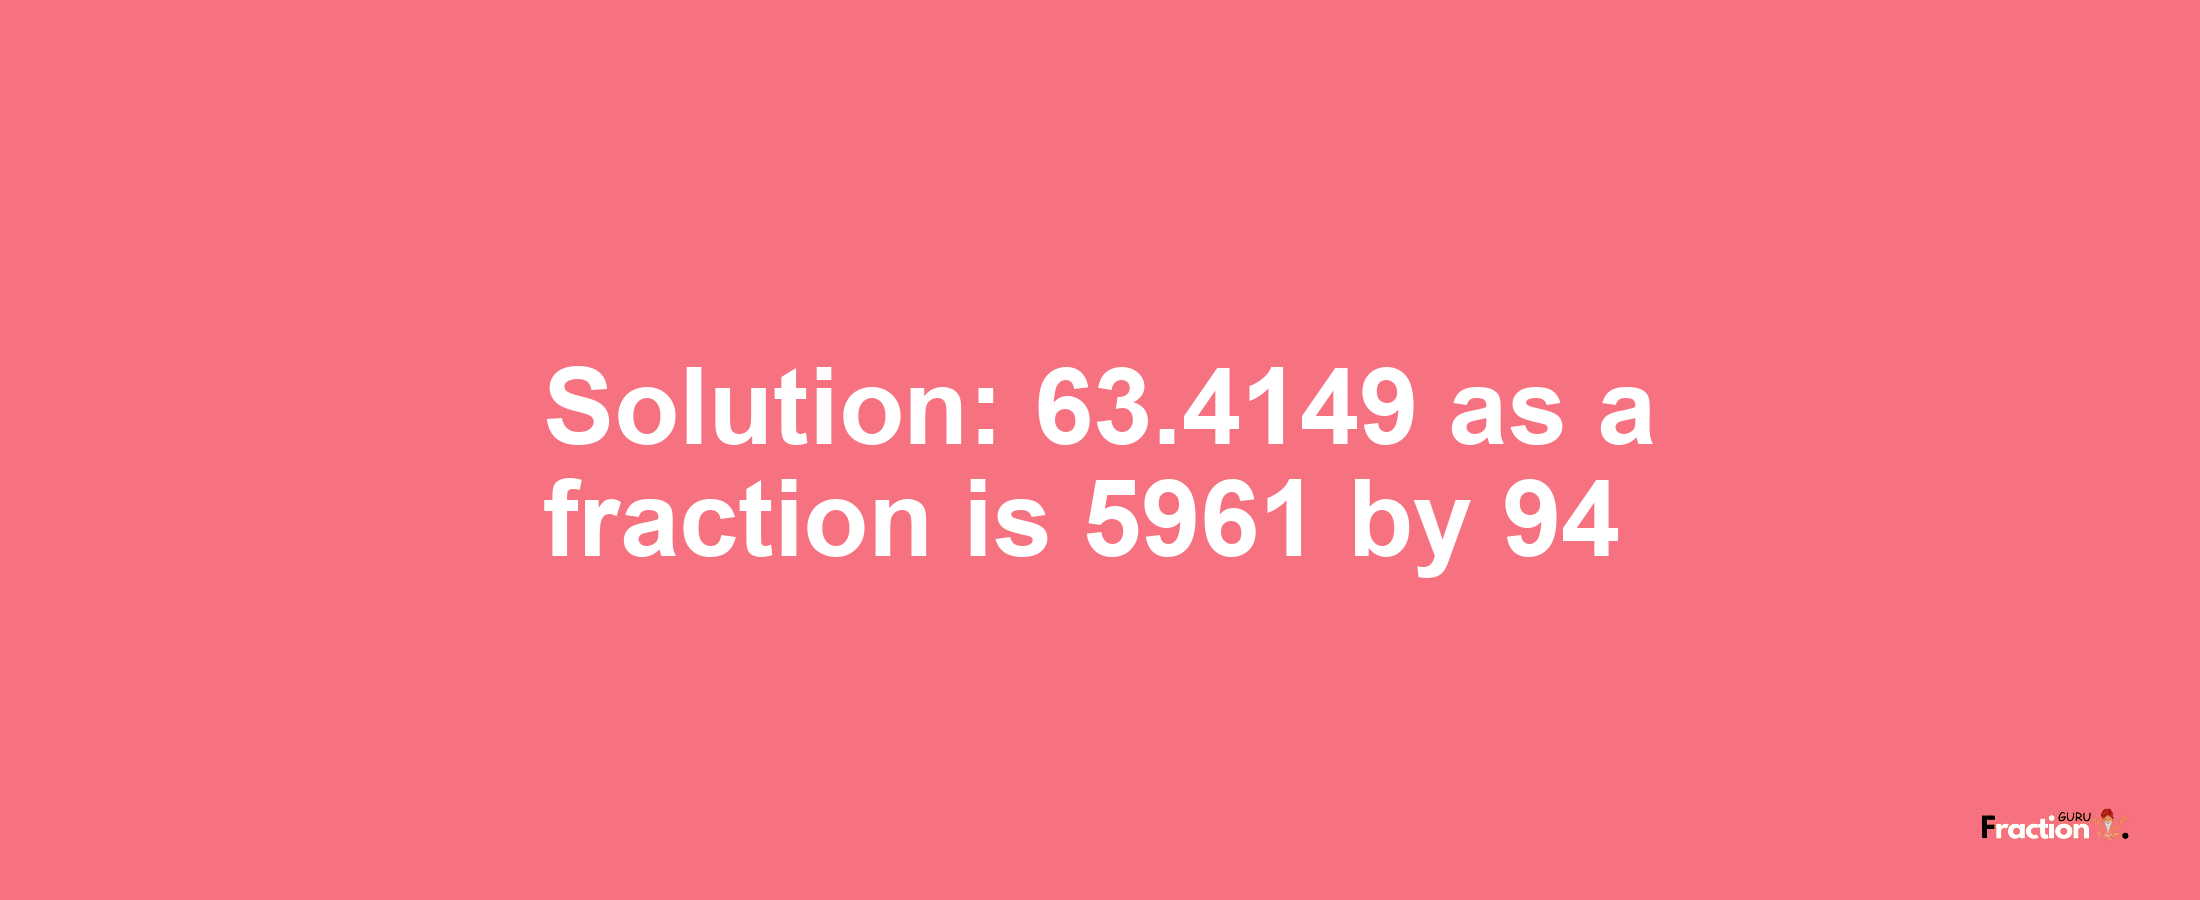 Solution:63.4149 as a fraction is 5961/94